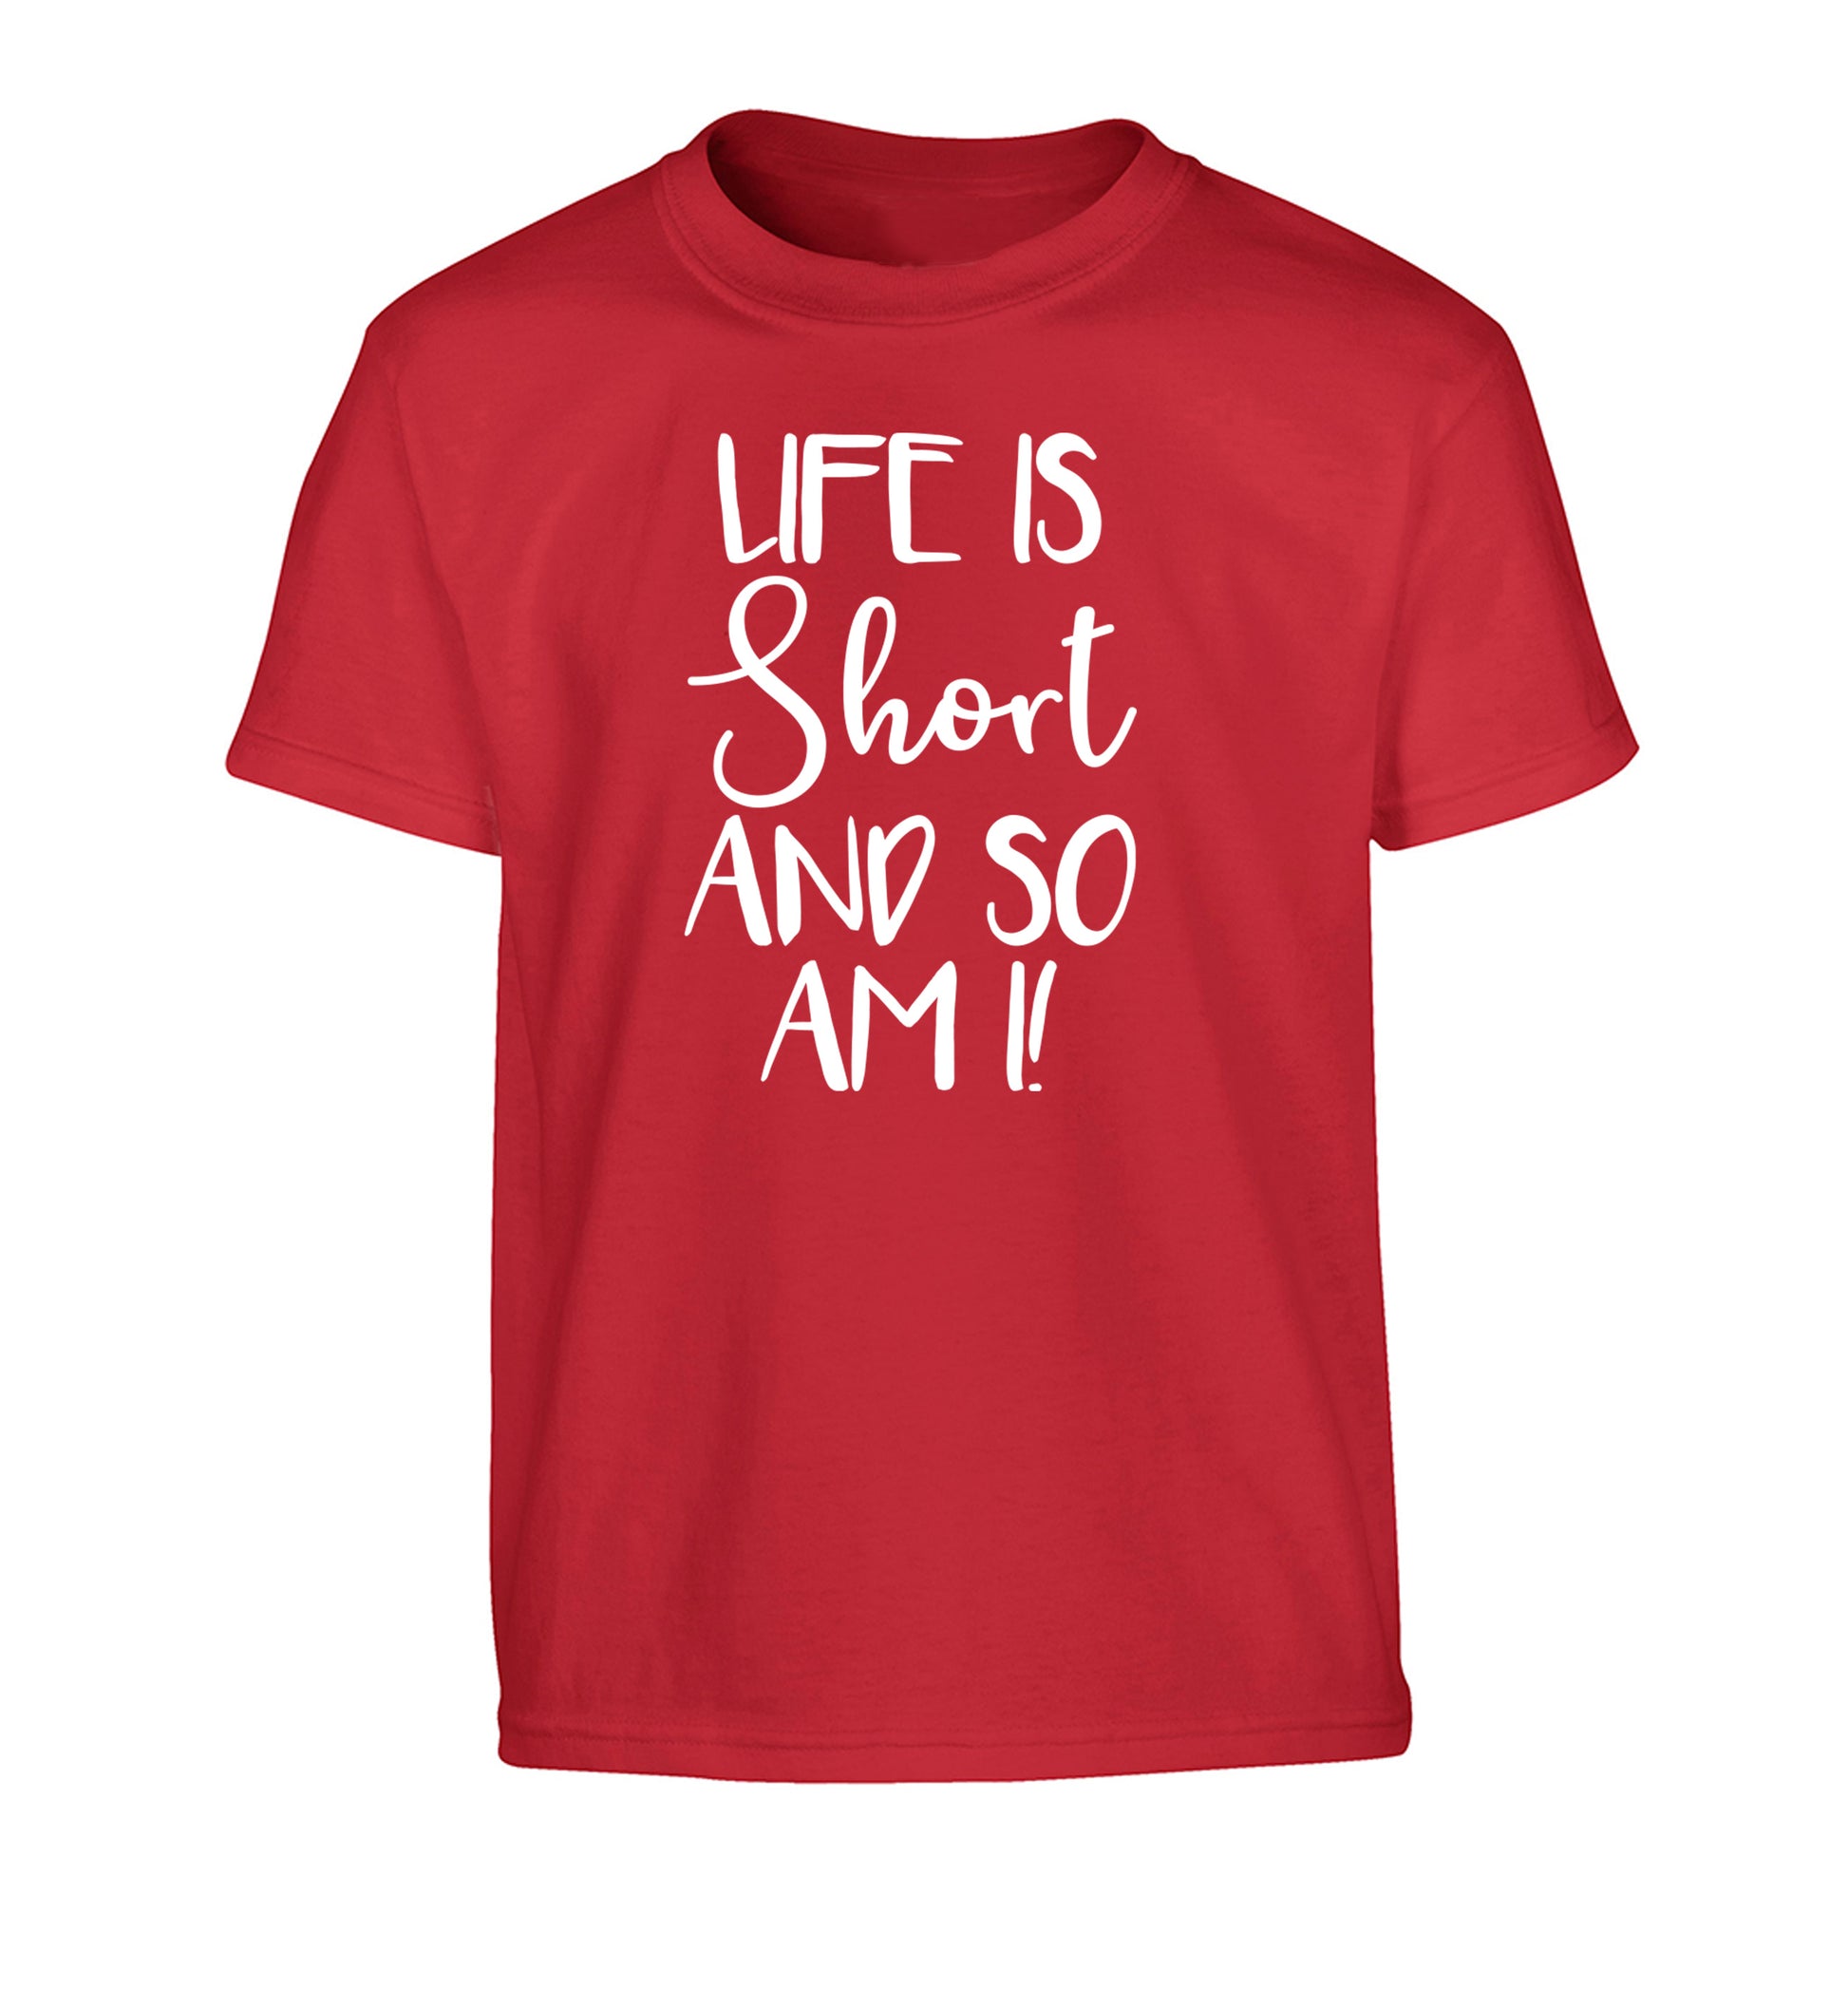 Life is short and so am I! Children's red Tshirt 12-13 Years